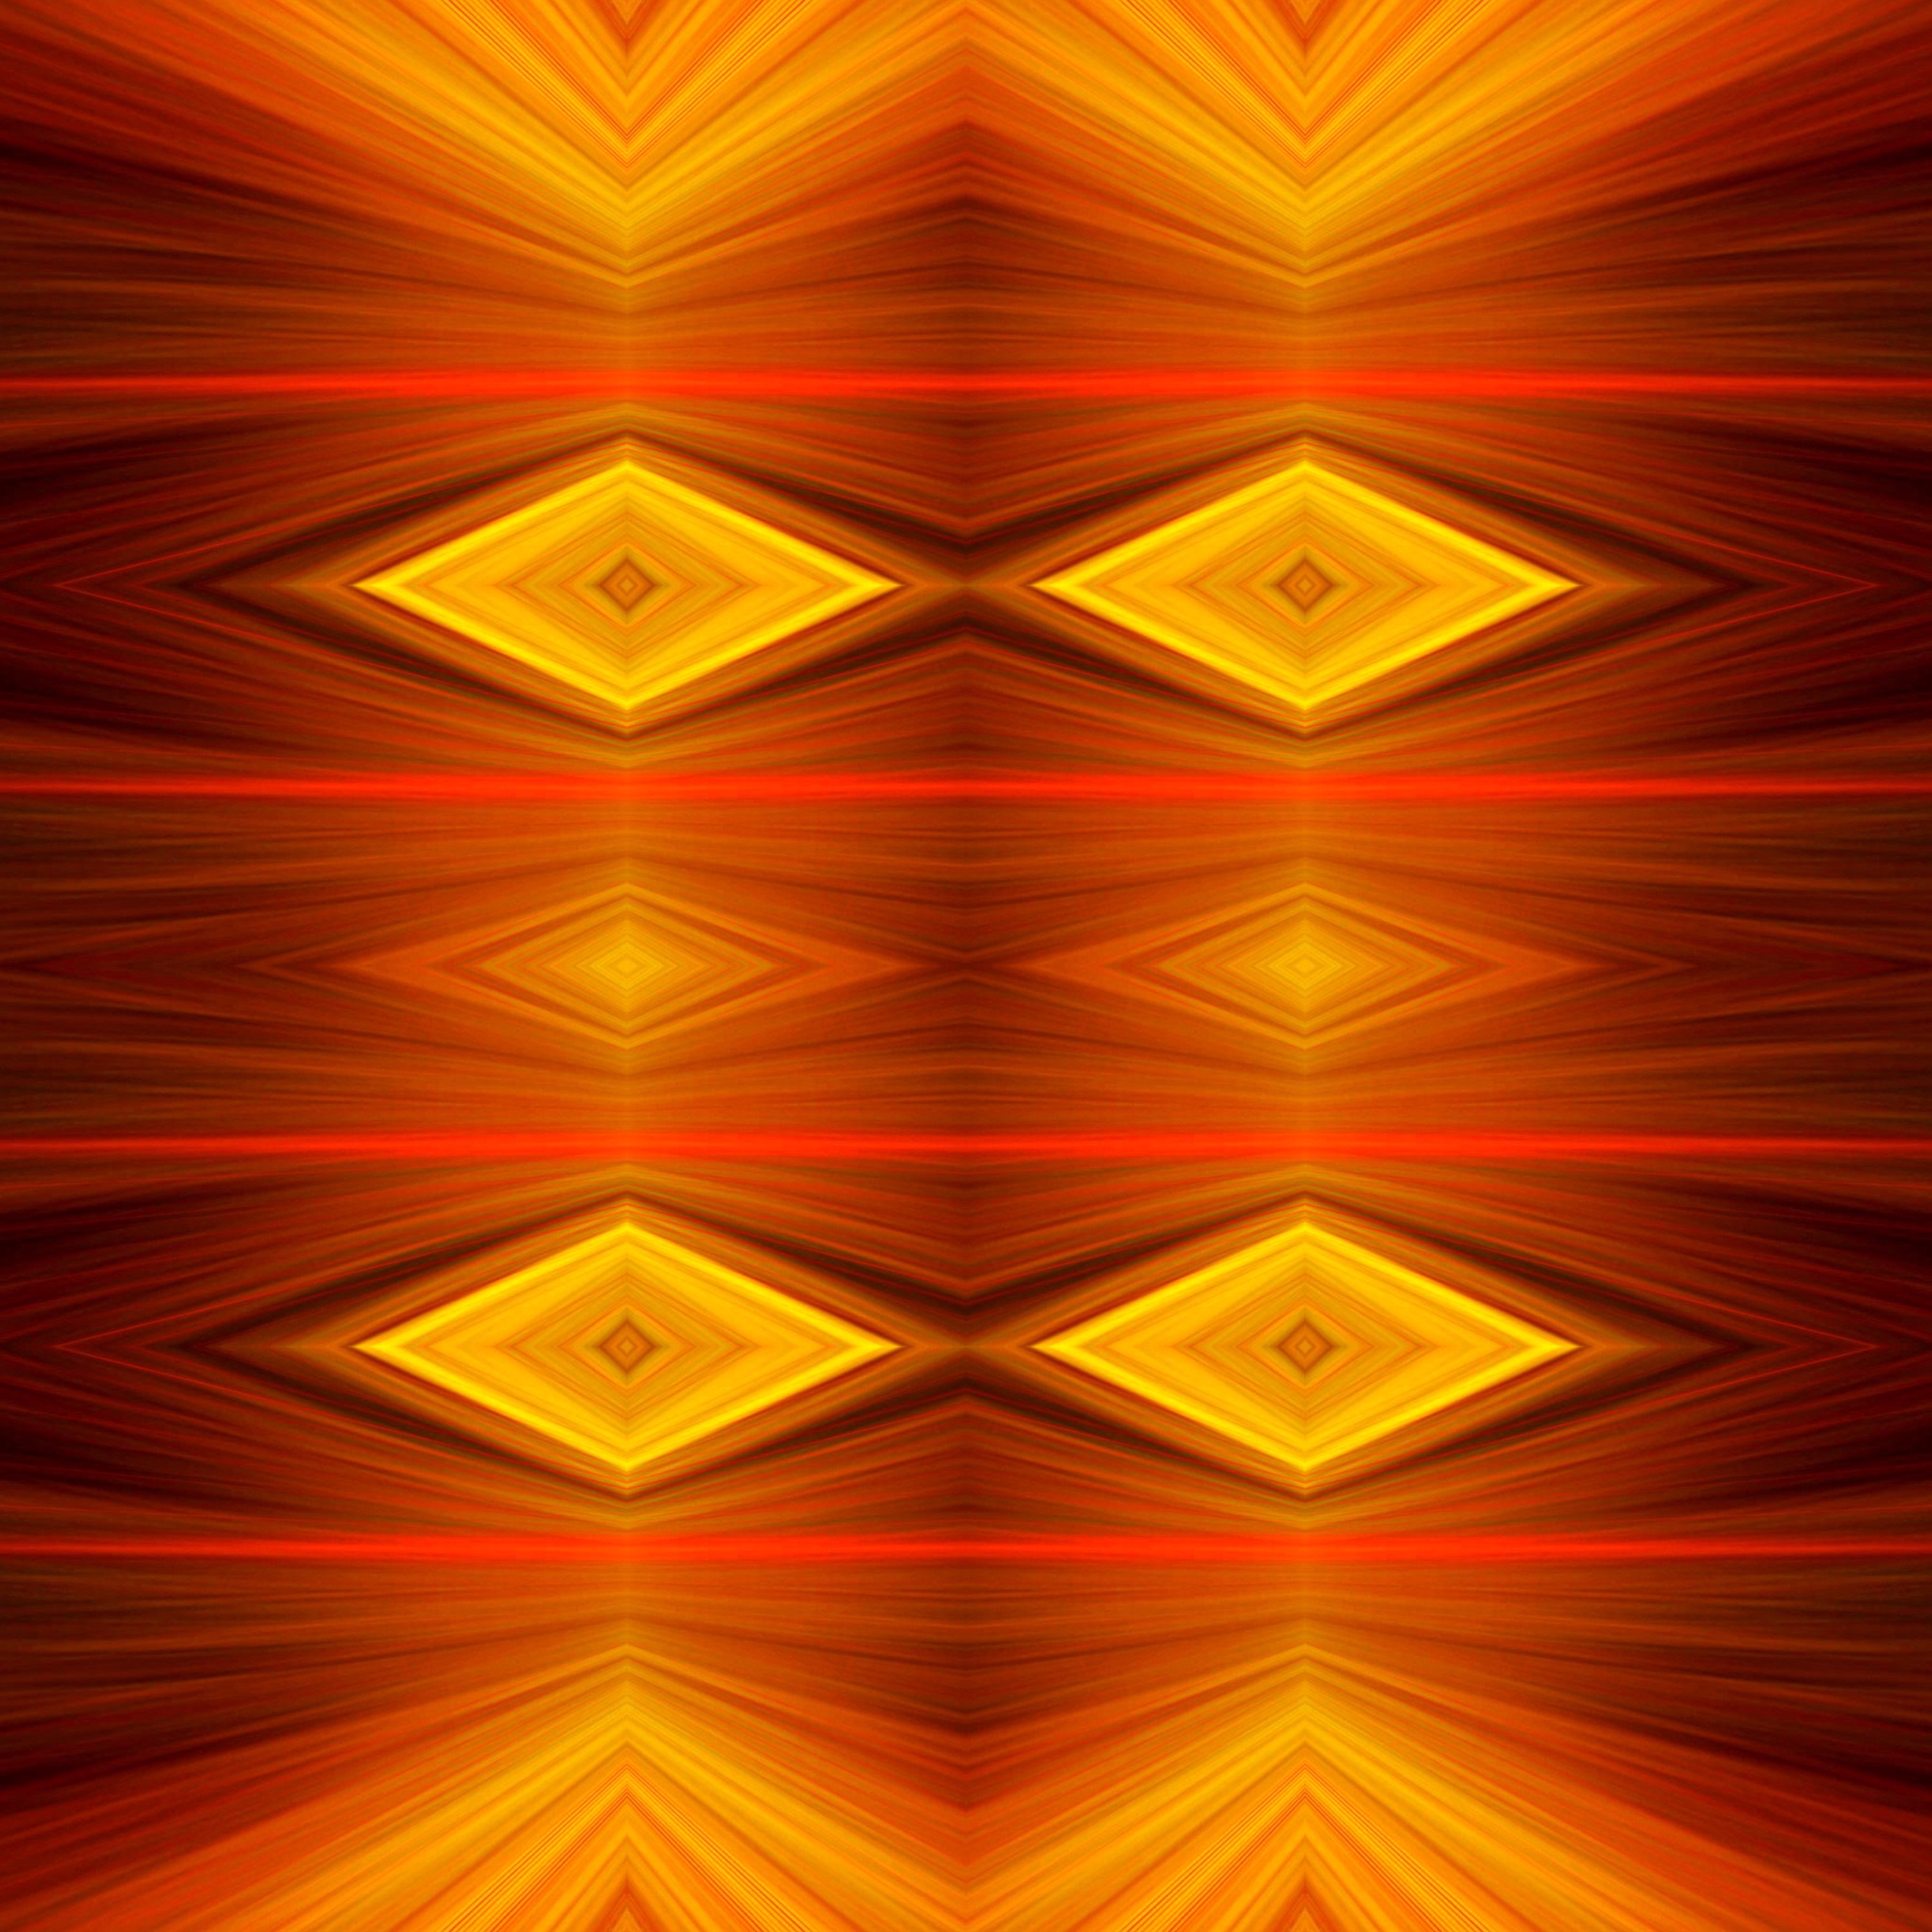 Wallpaper with geometric yellow red pattern free image download